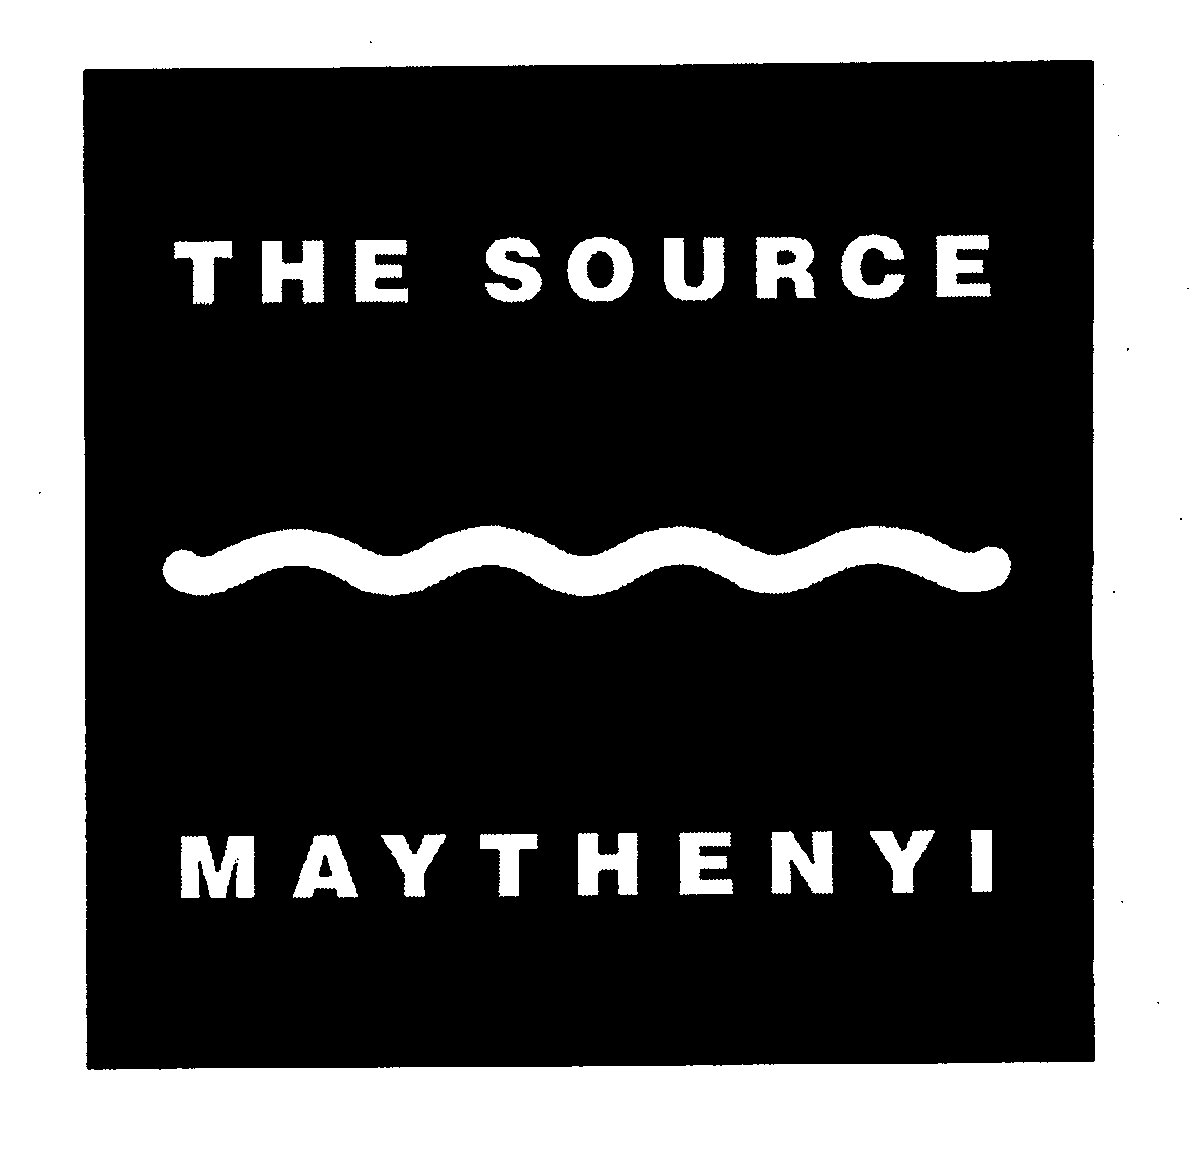 THE SOURCE MAYTHENYI